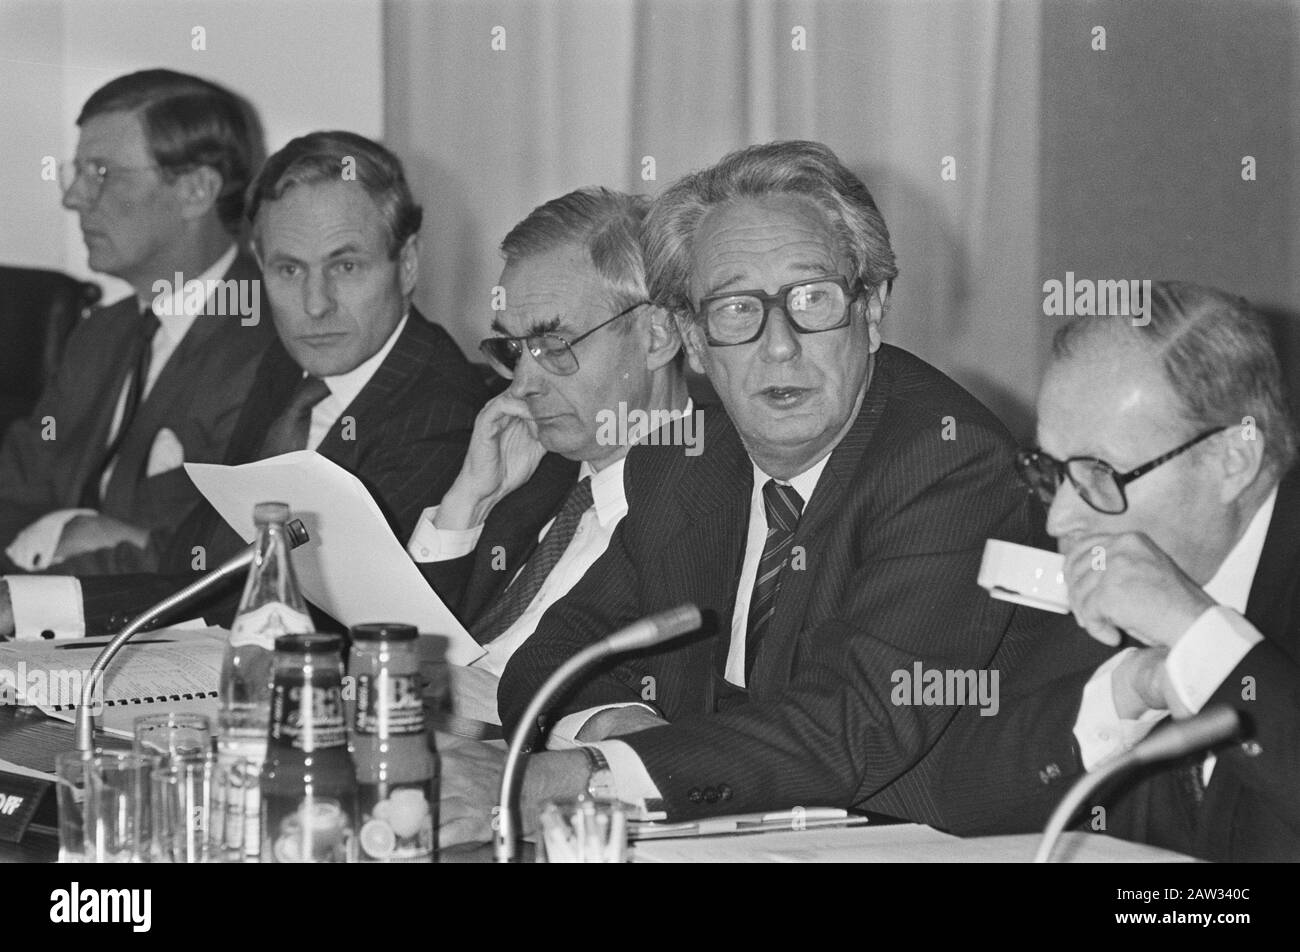 Attendance annual figures ABN Bank, Board Chairman Dr R. Hazelhoff, command Financial Times. Date: March 6, 1987 Keywords: president Name of Person: Drs. R. Hazelhoff Institution Name: Financial Times Stock Photo